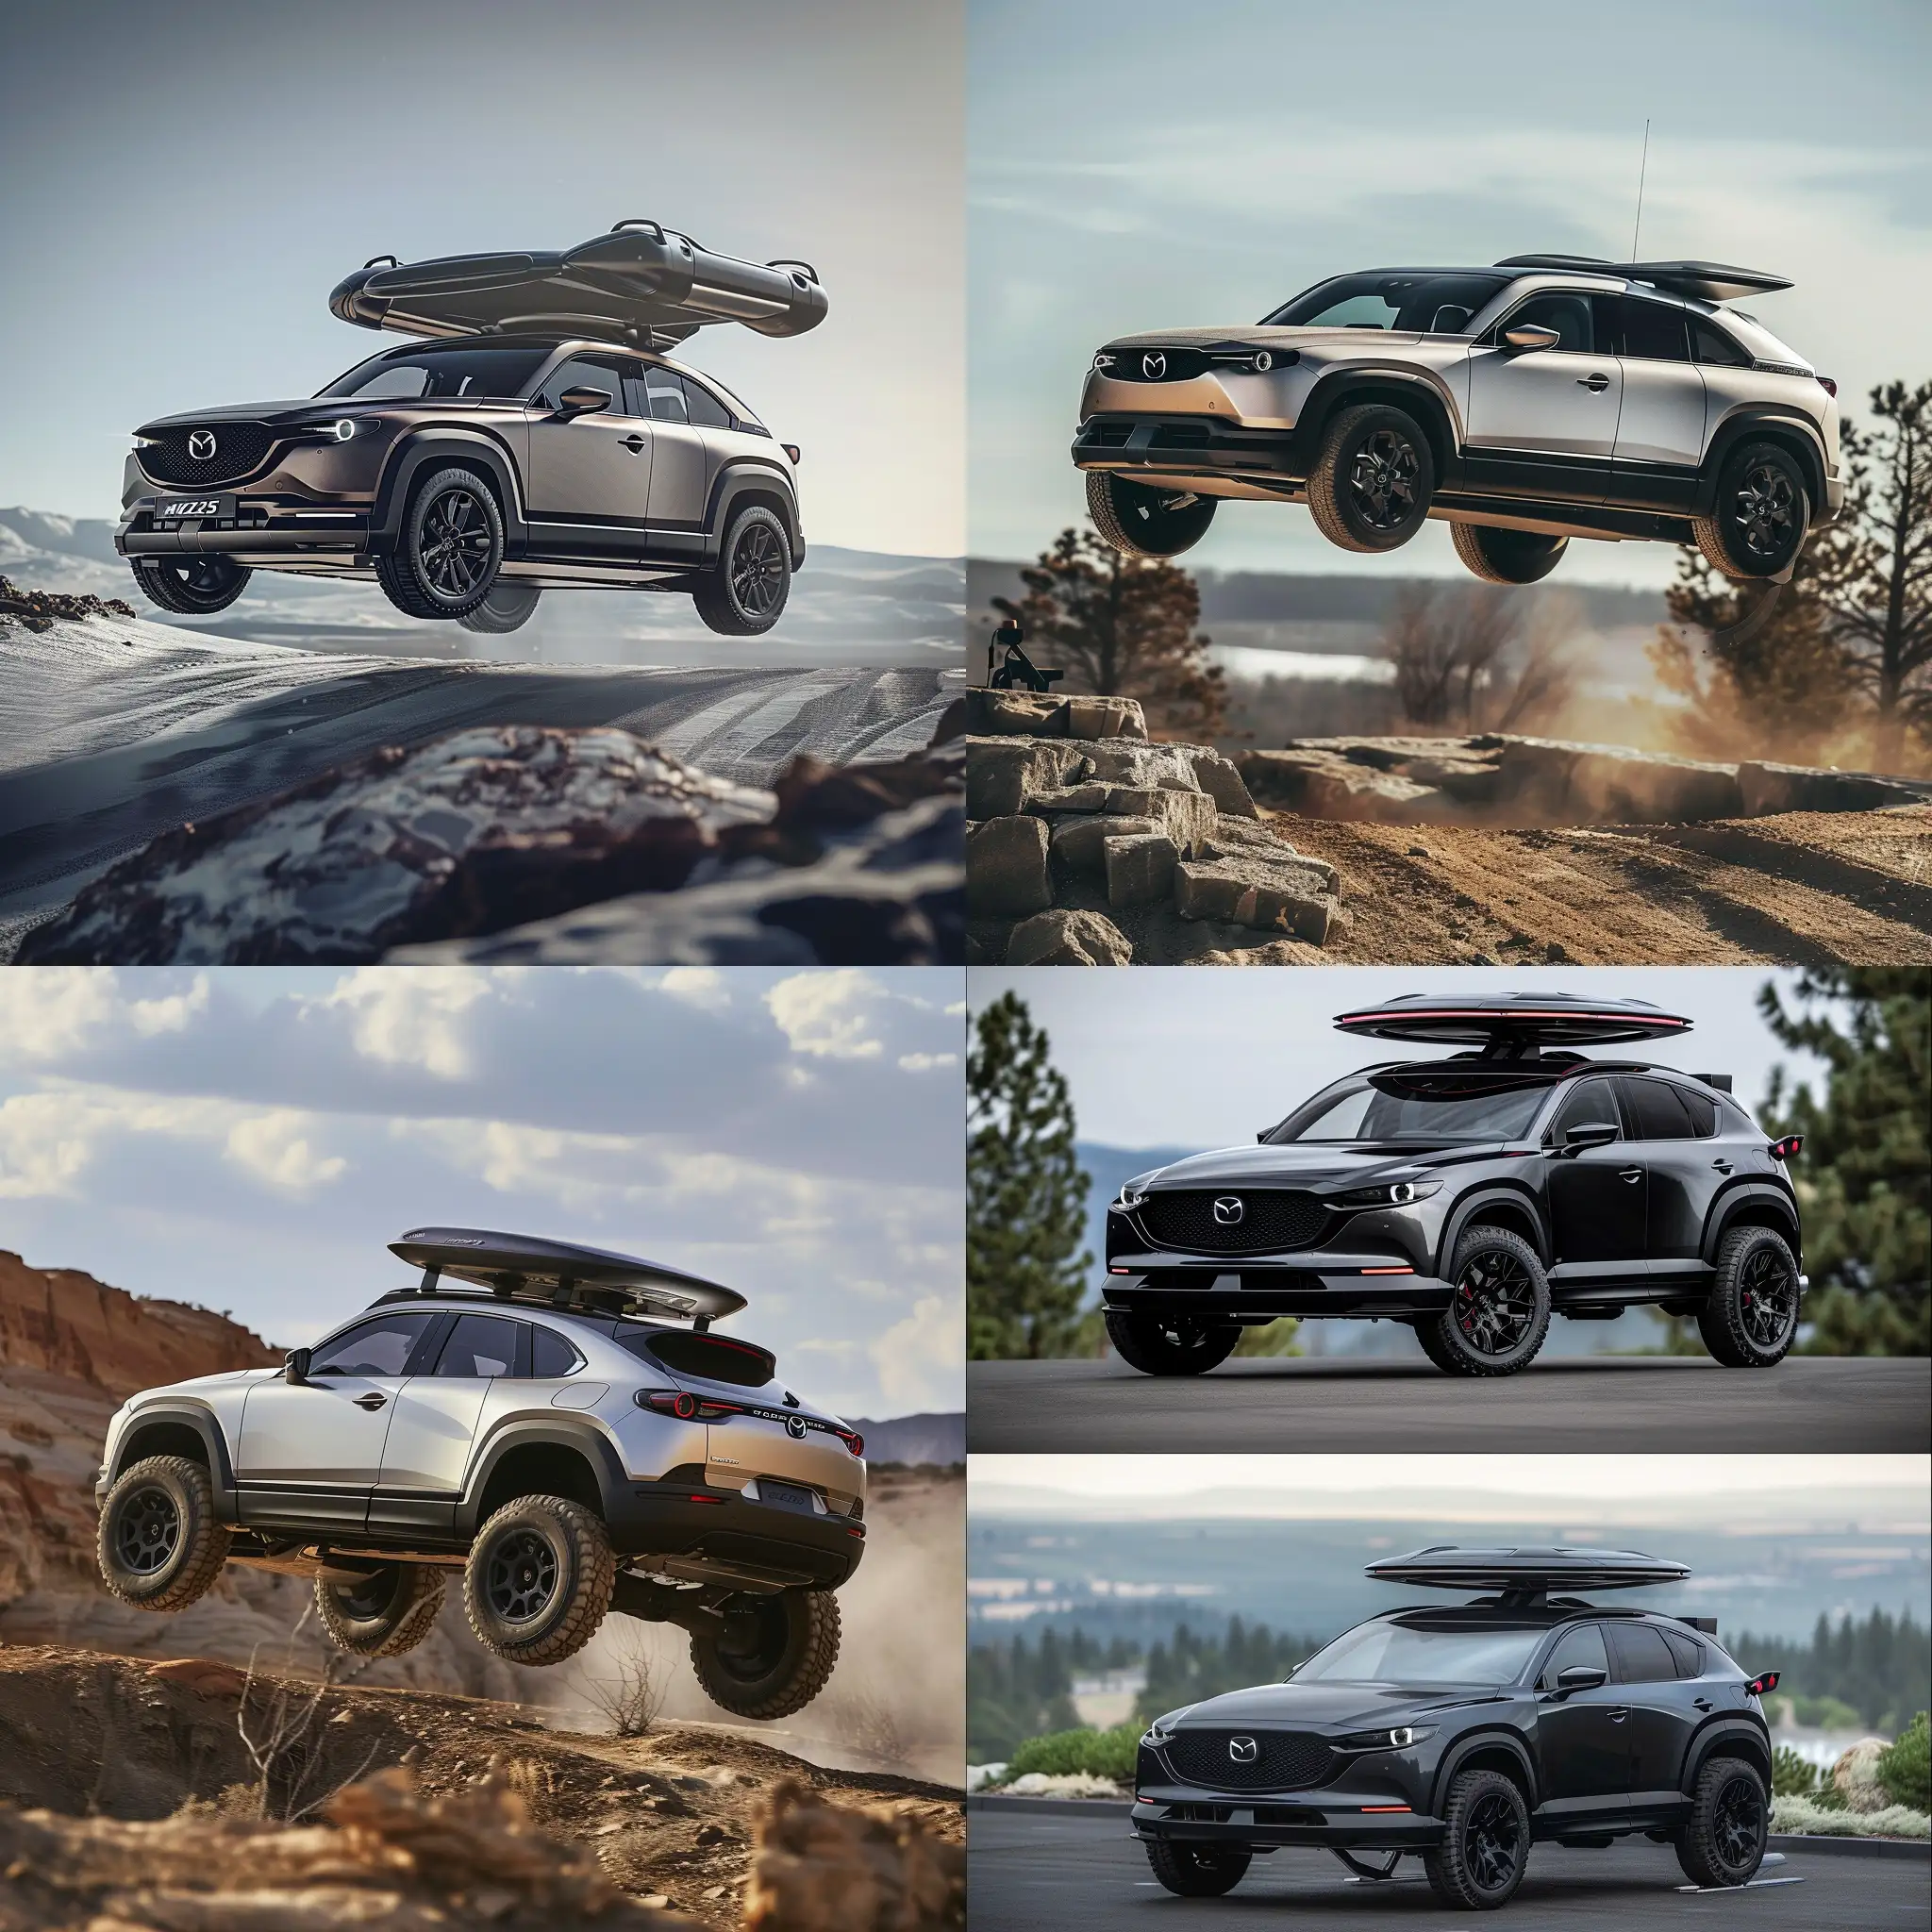 Hybrid of Mazda CX-5 2023 and Porsche Cayenne 2050 All Terrain hover Vehicle